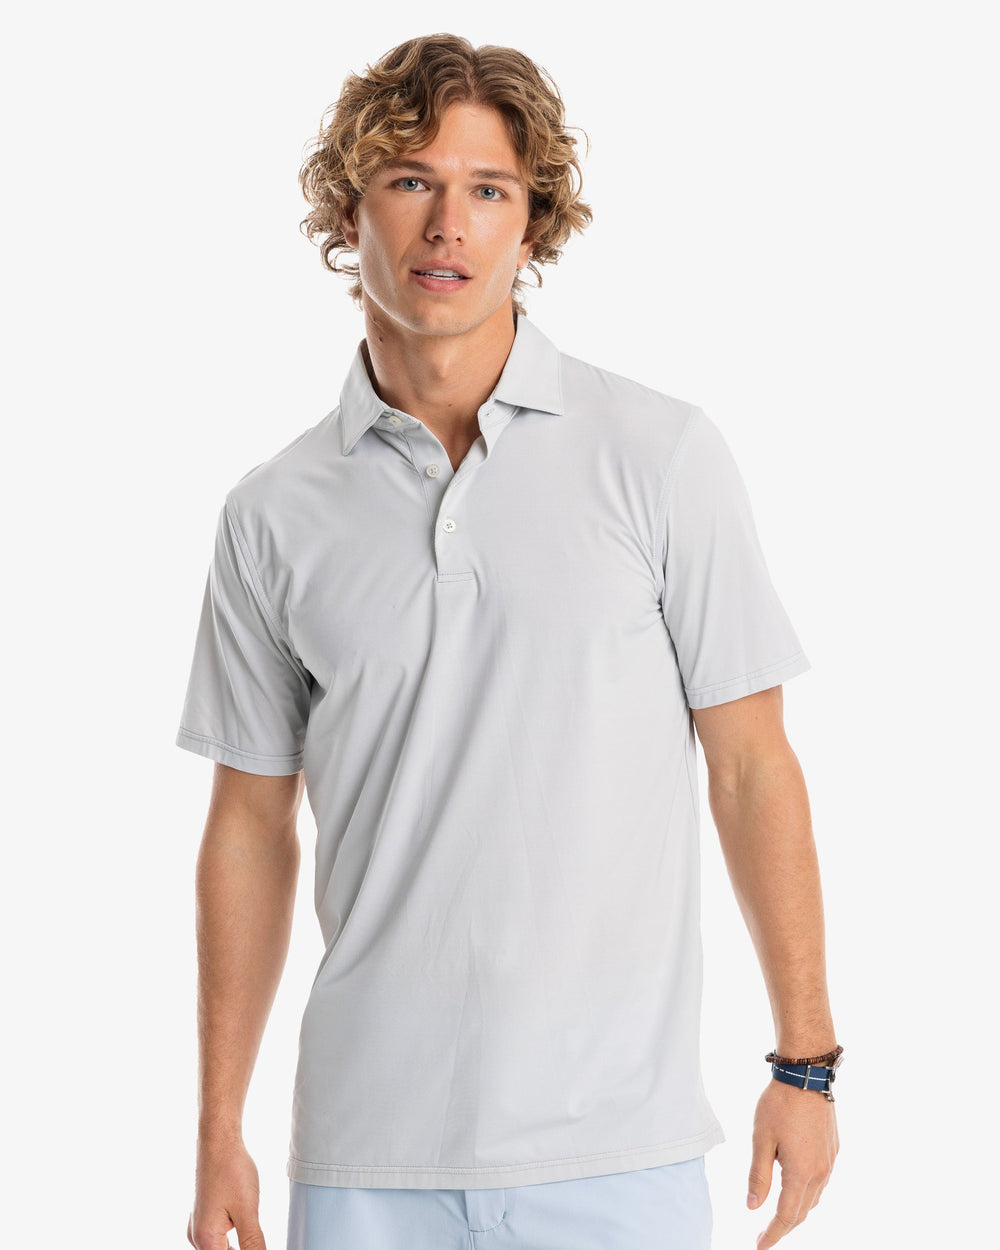 The model front view of the Men's Sawgrass Stripe brrr°®-eeze Performance Polo Shirt by Southern Tide - Seagull Grey